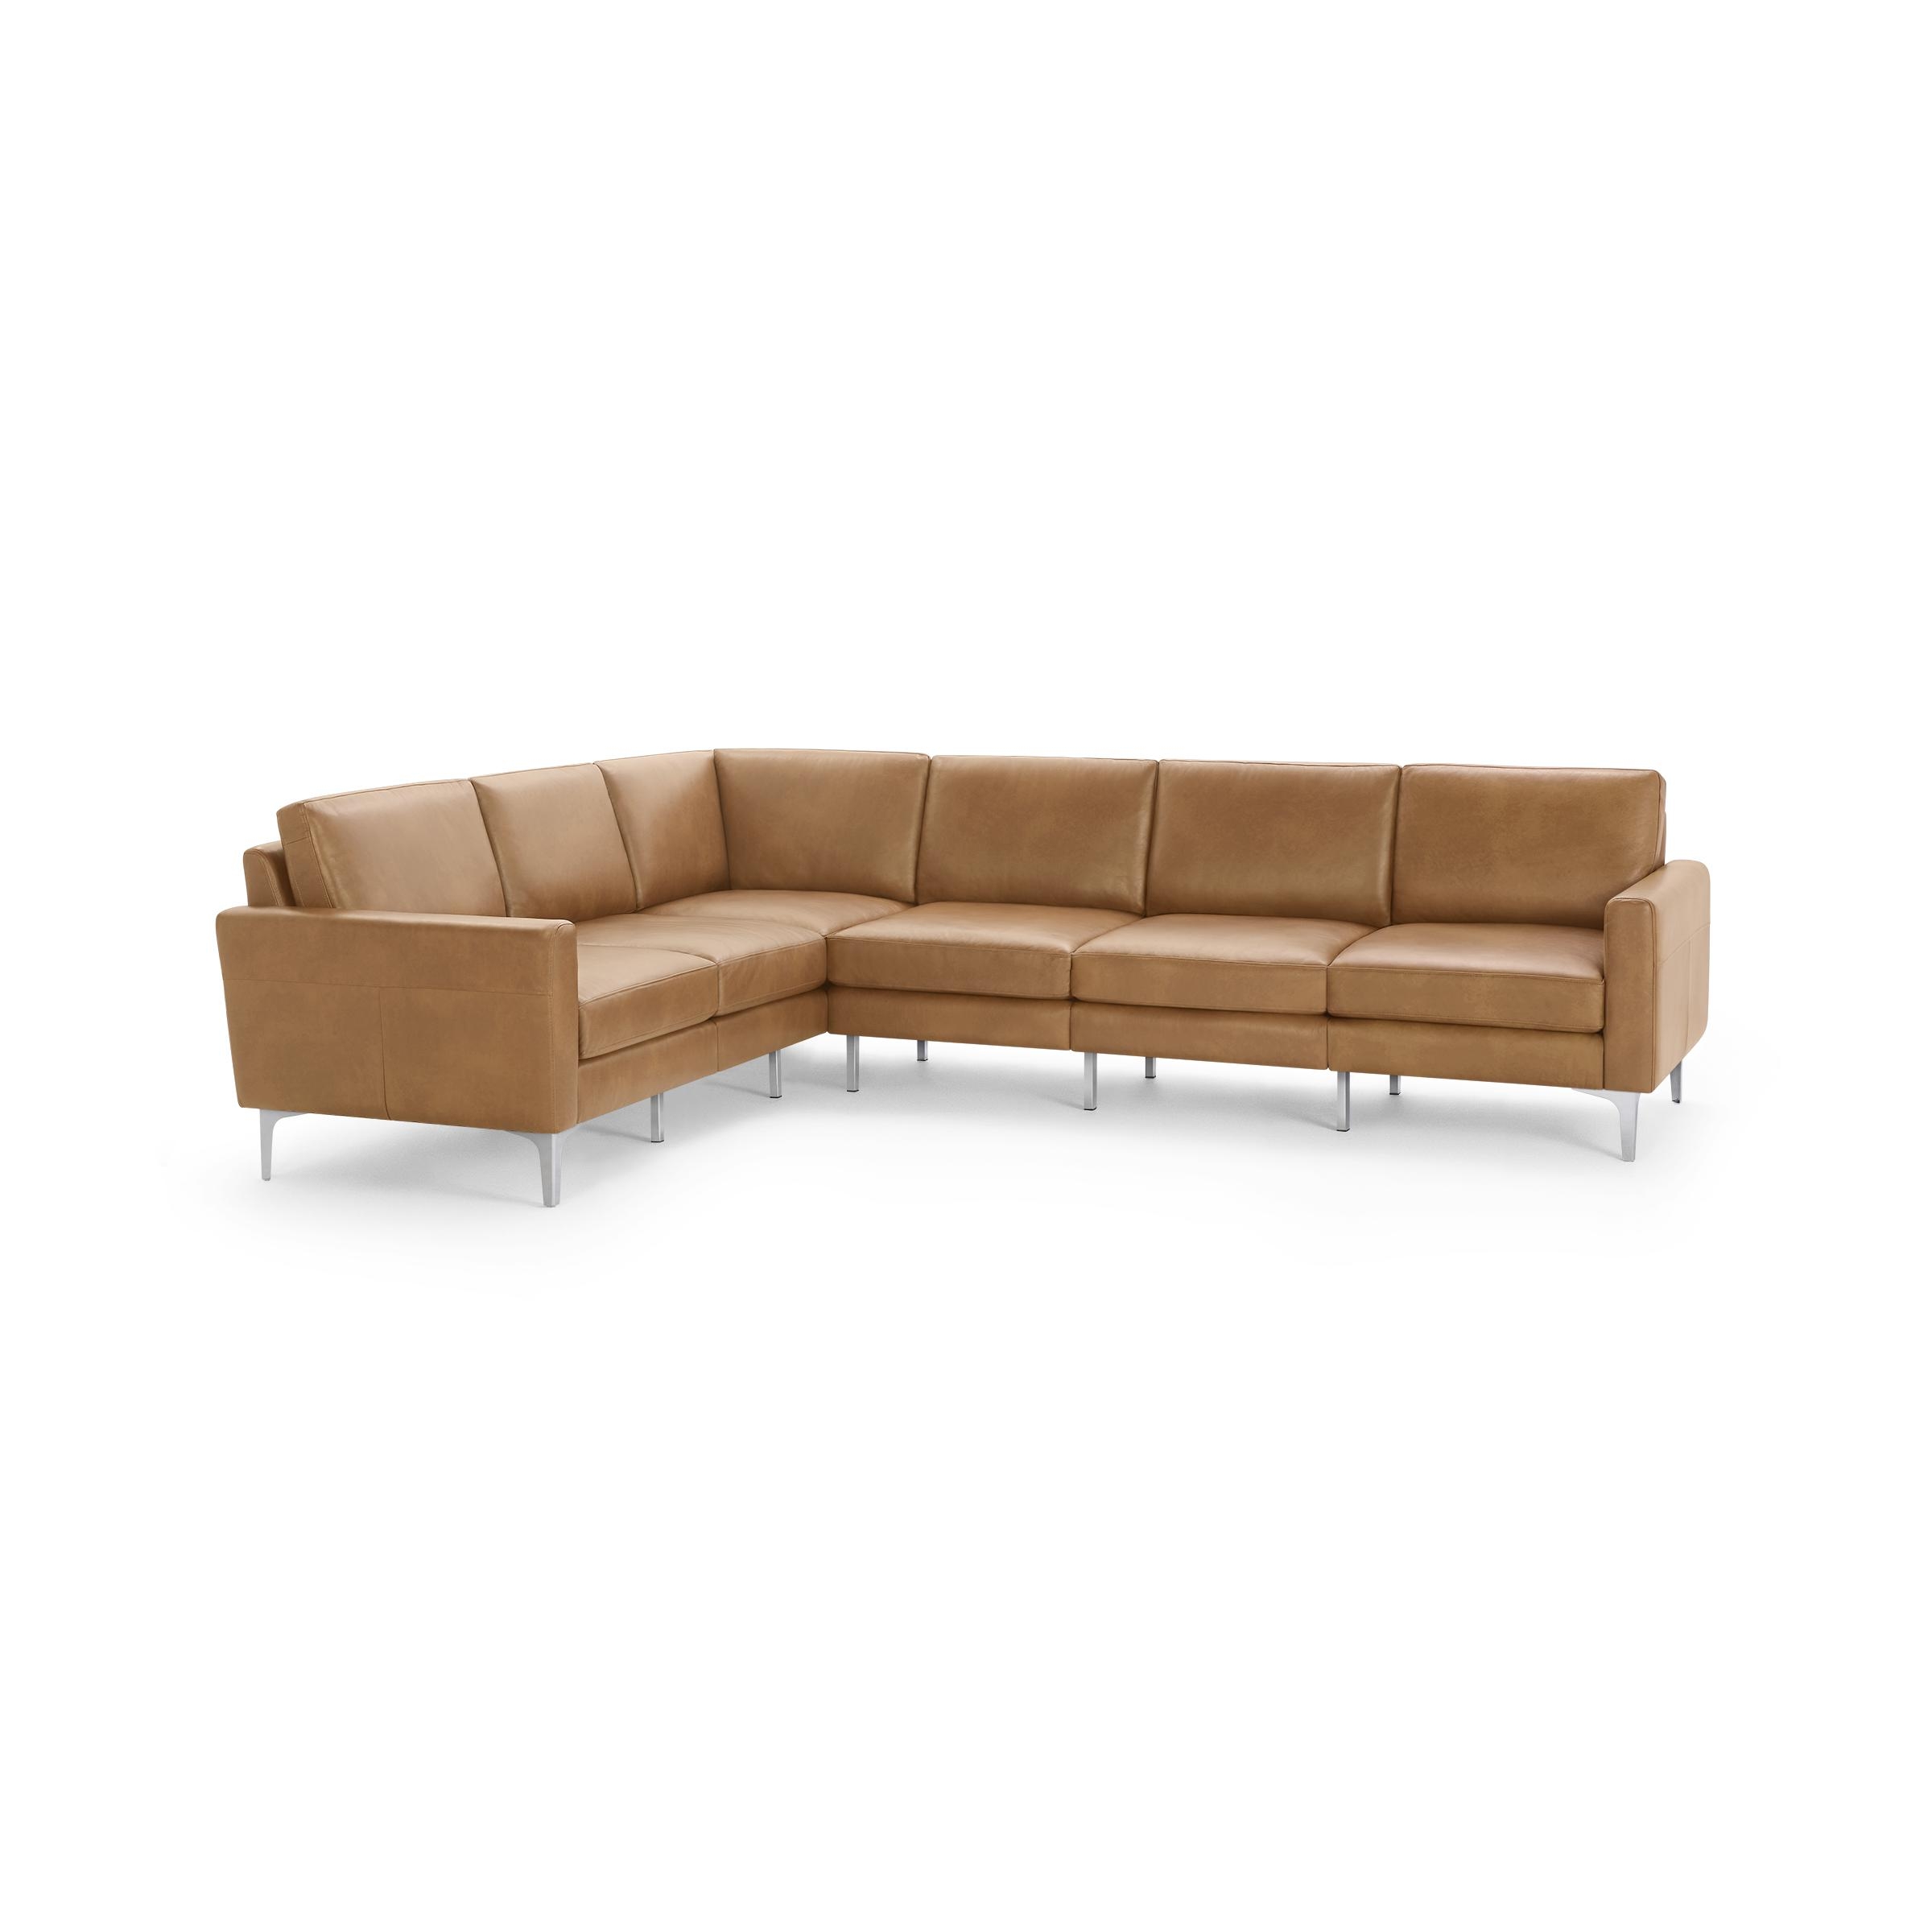 Nomad Leather 6-Seat Corner Sectional in Camel - Image 2